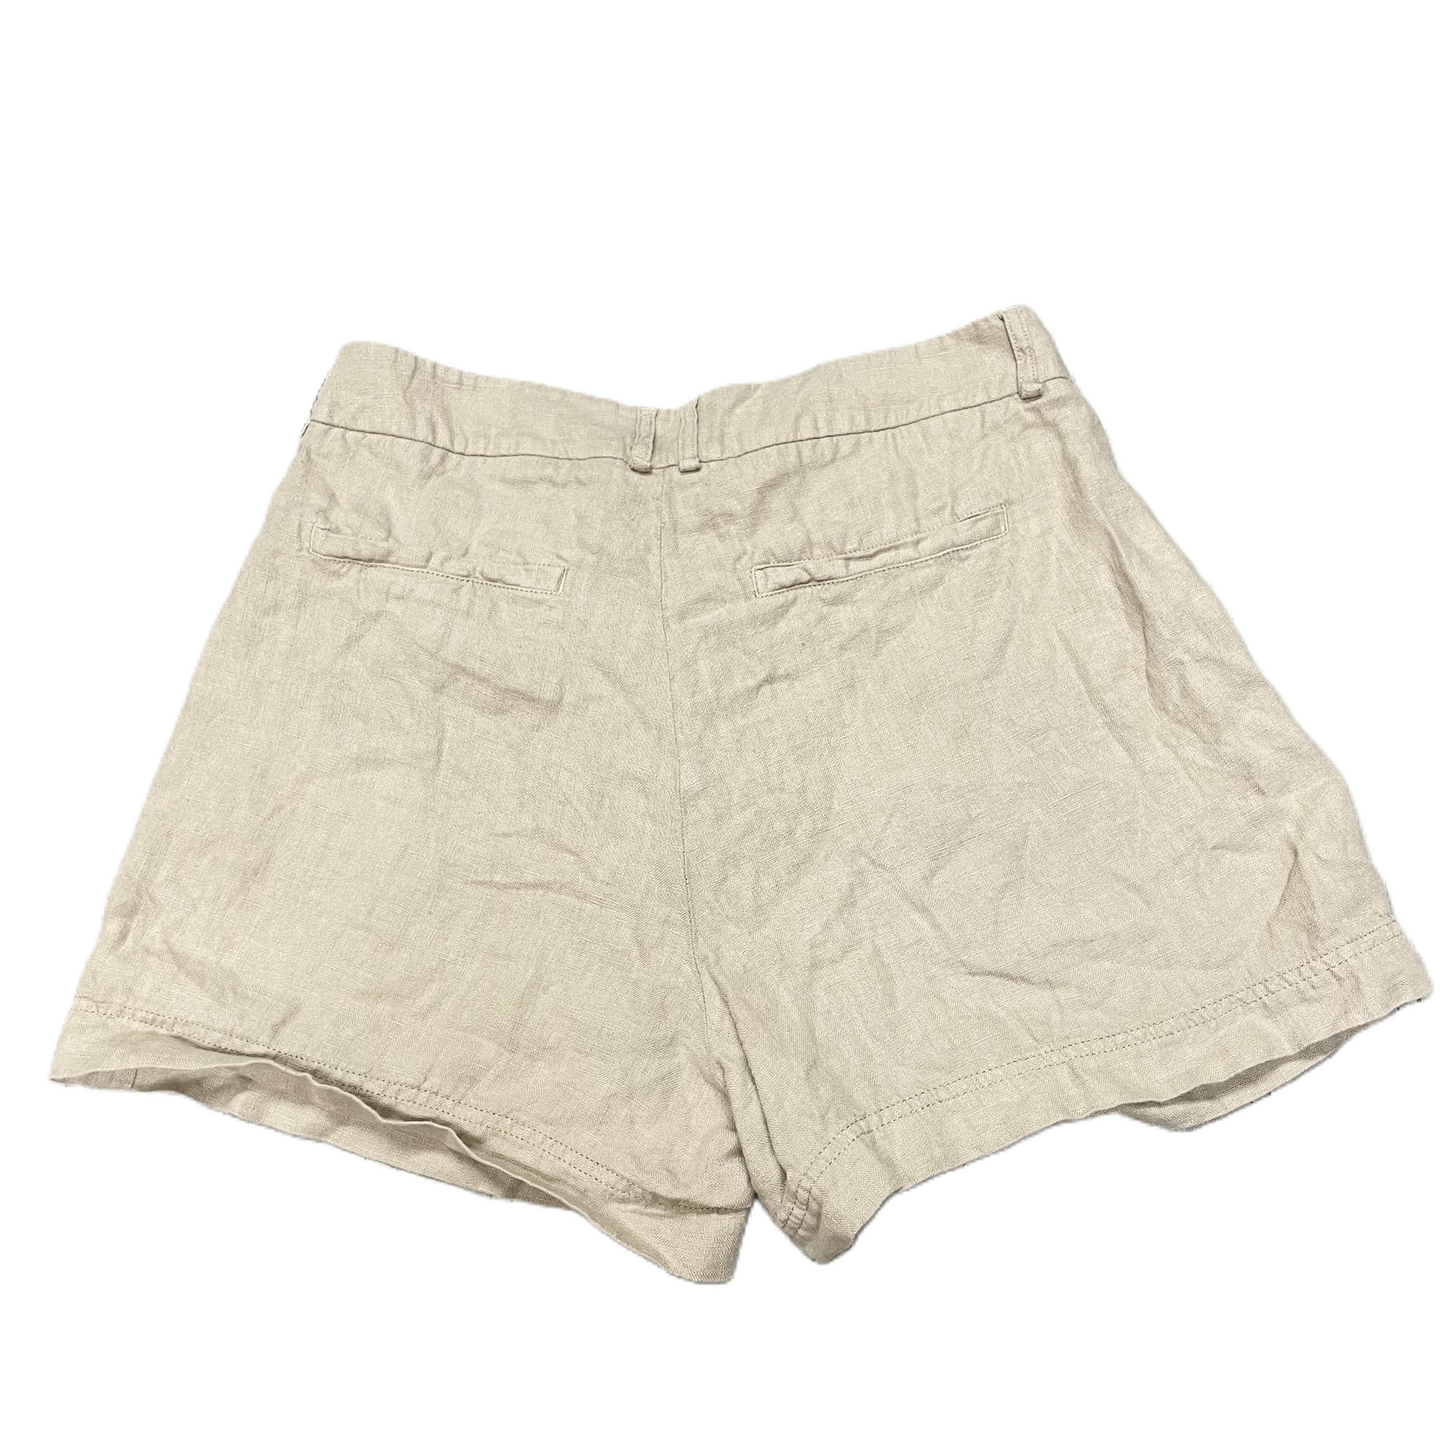 Tan Shorts By Free People, Size: 6